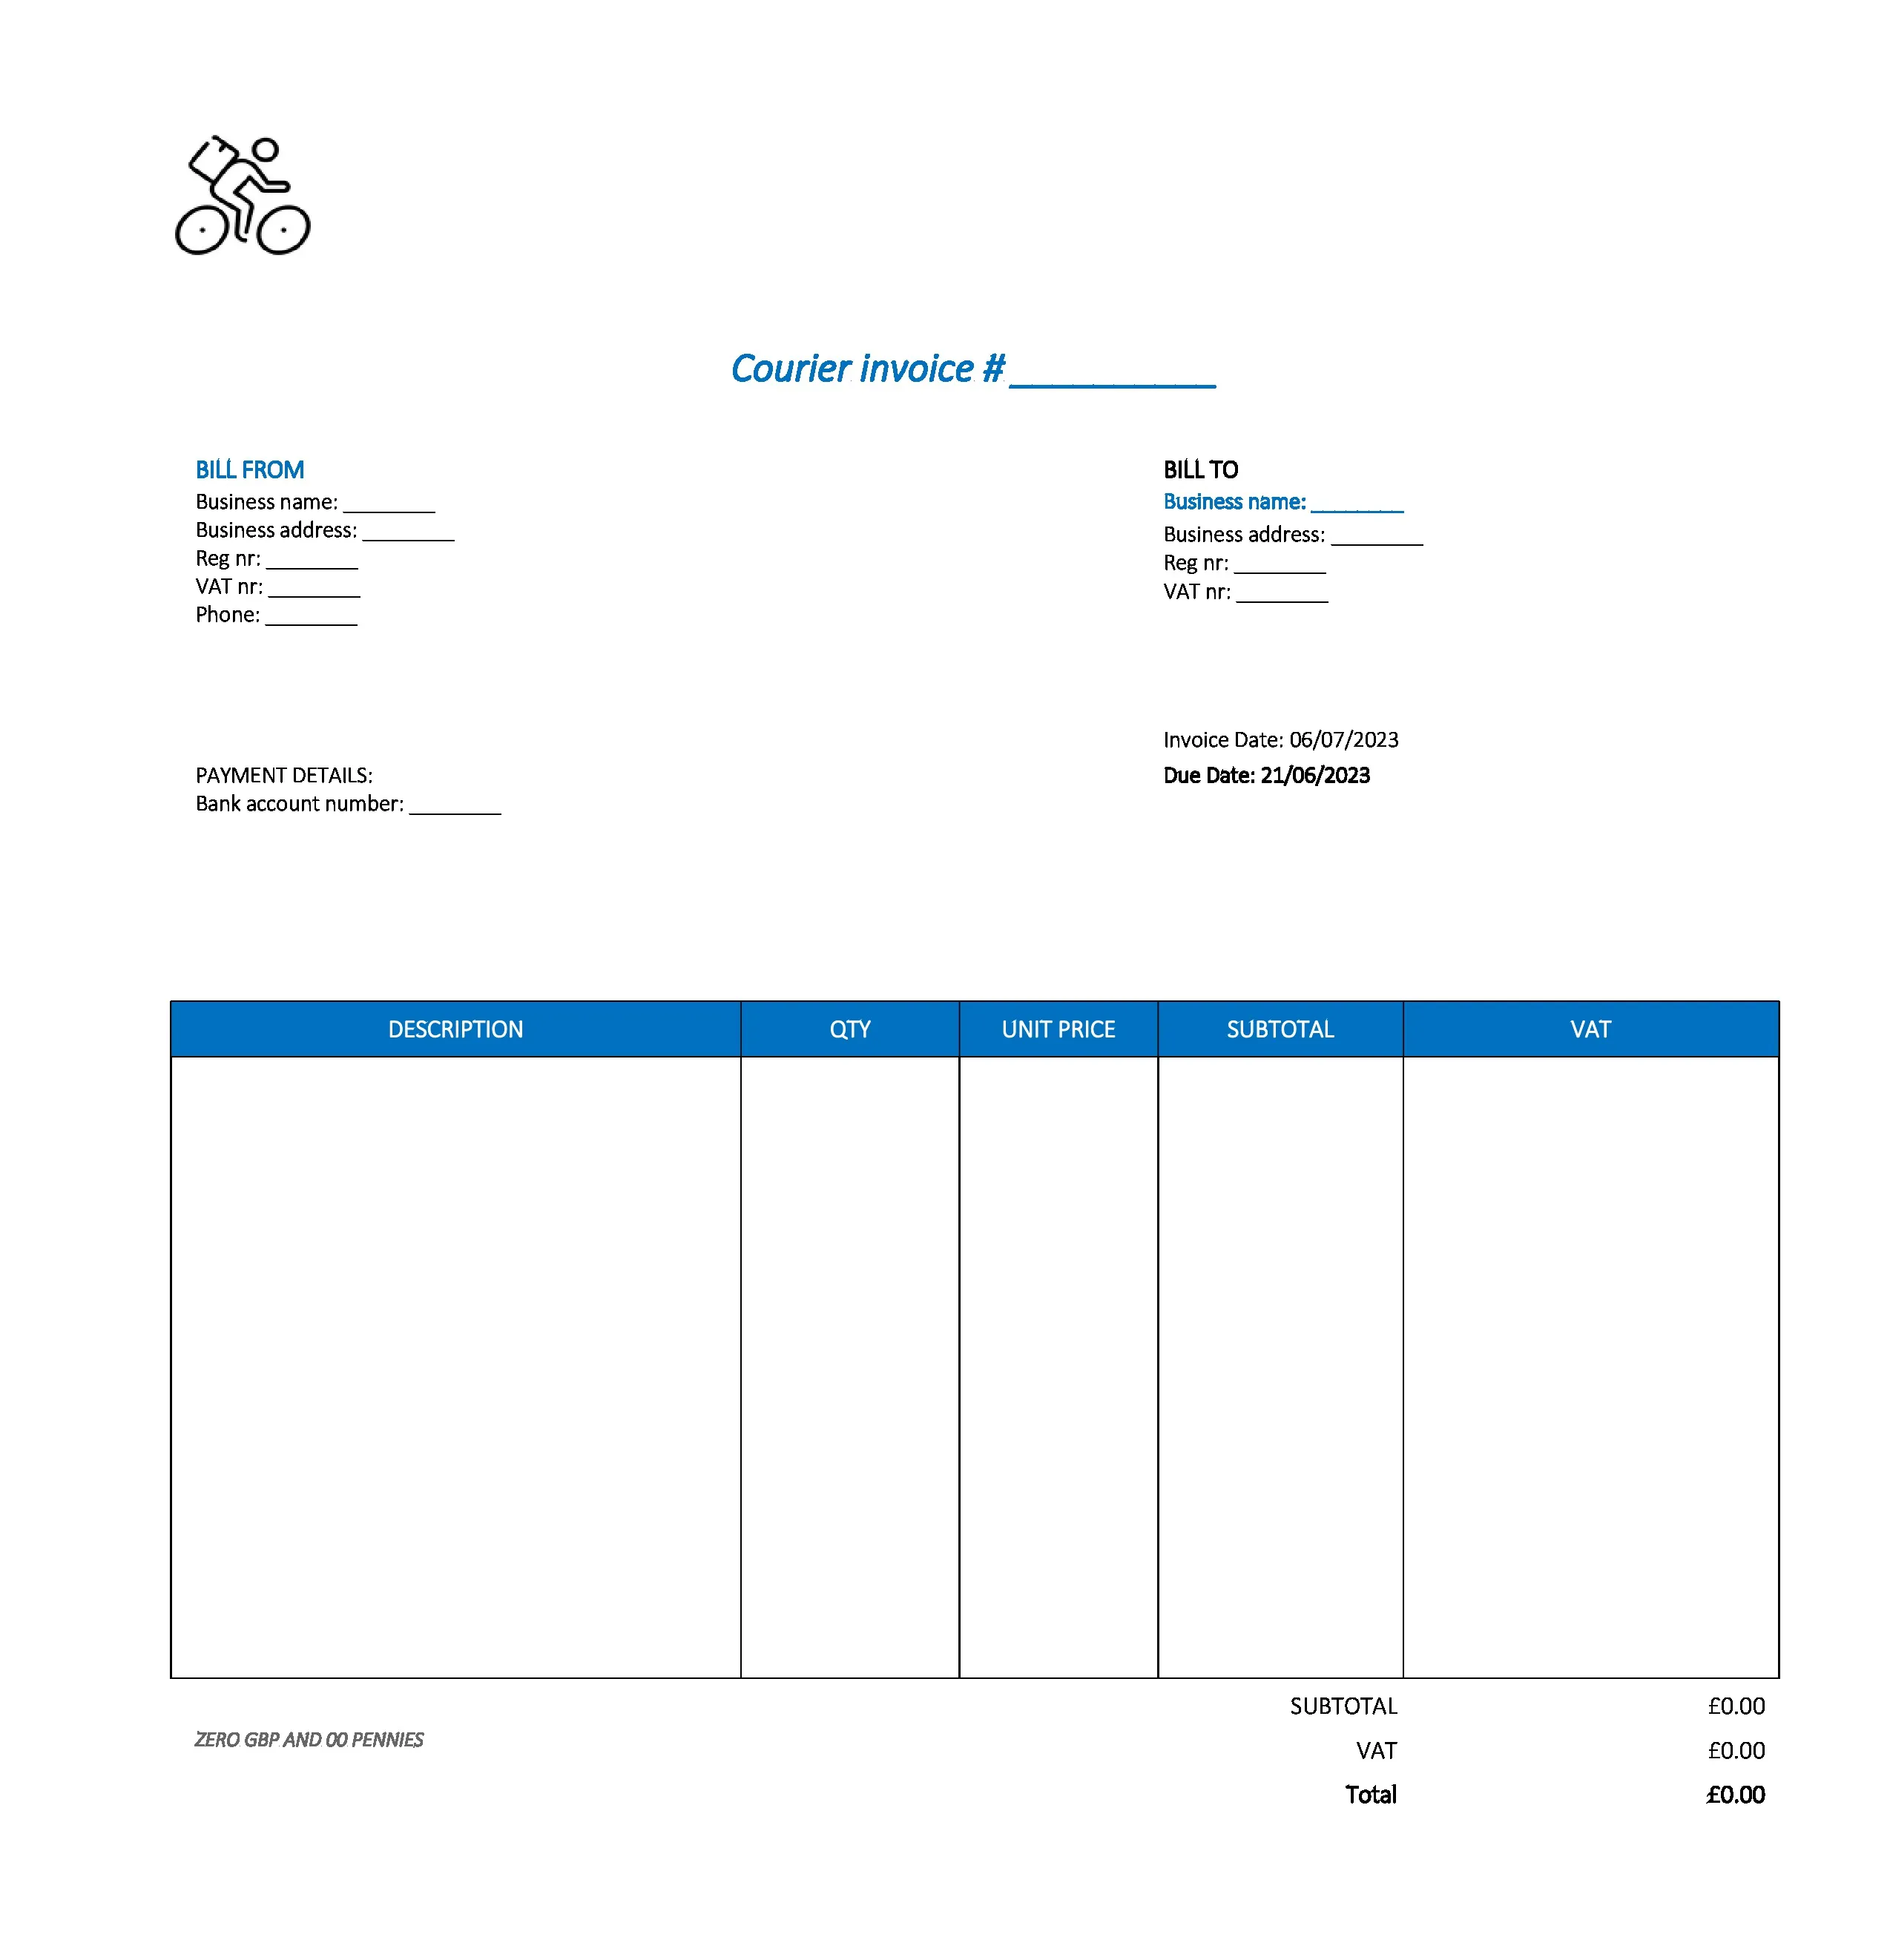 typical courier invoice template UK Excel / Google sheets